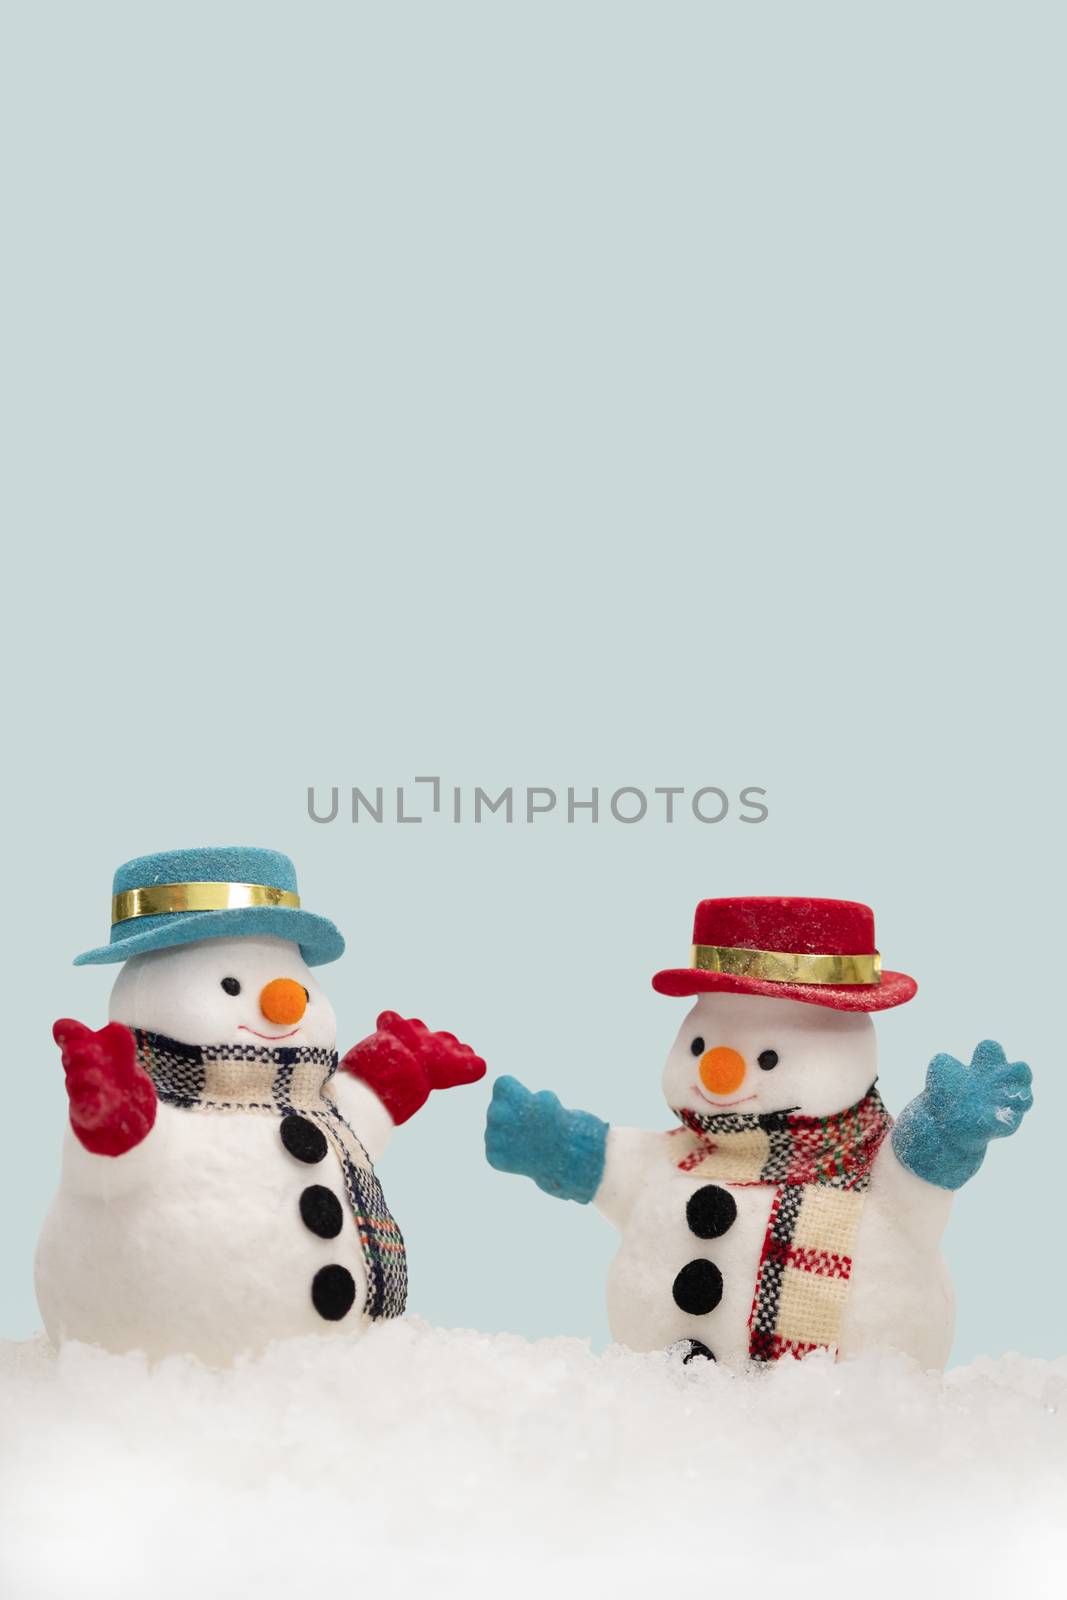 Two snowman on blue background with copy space for season greeting Merry Christmas, AF point selection,